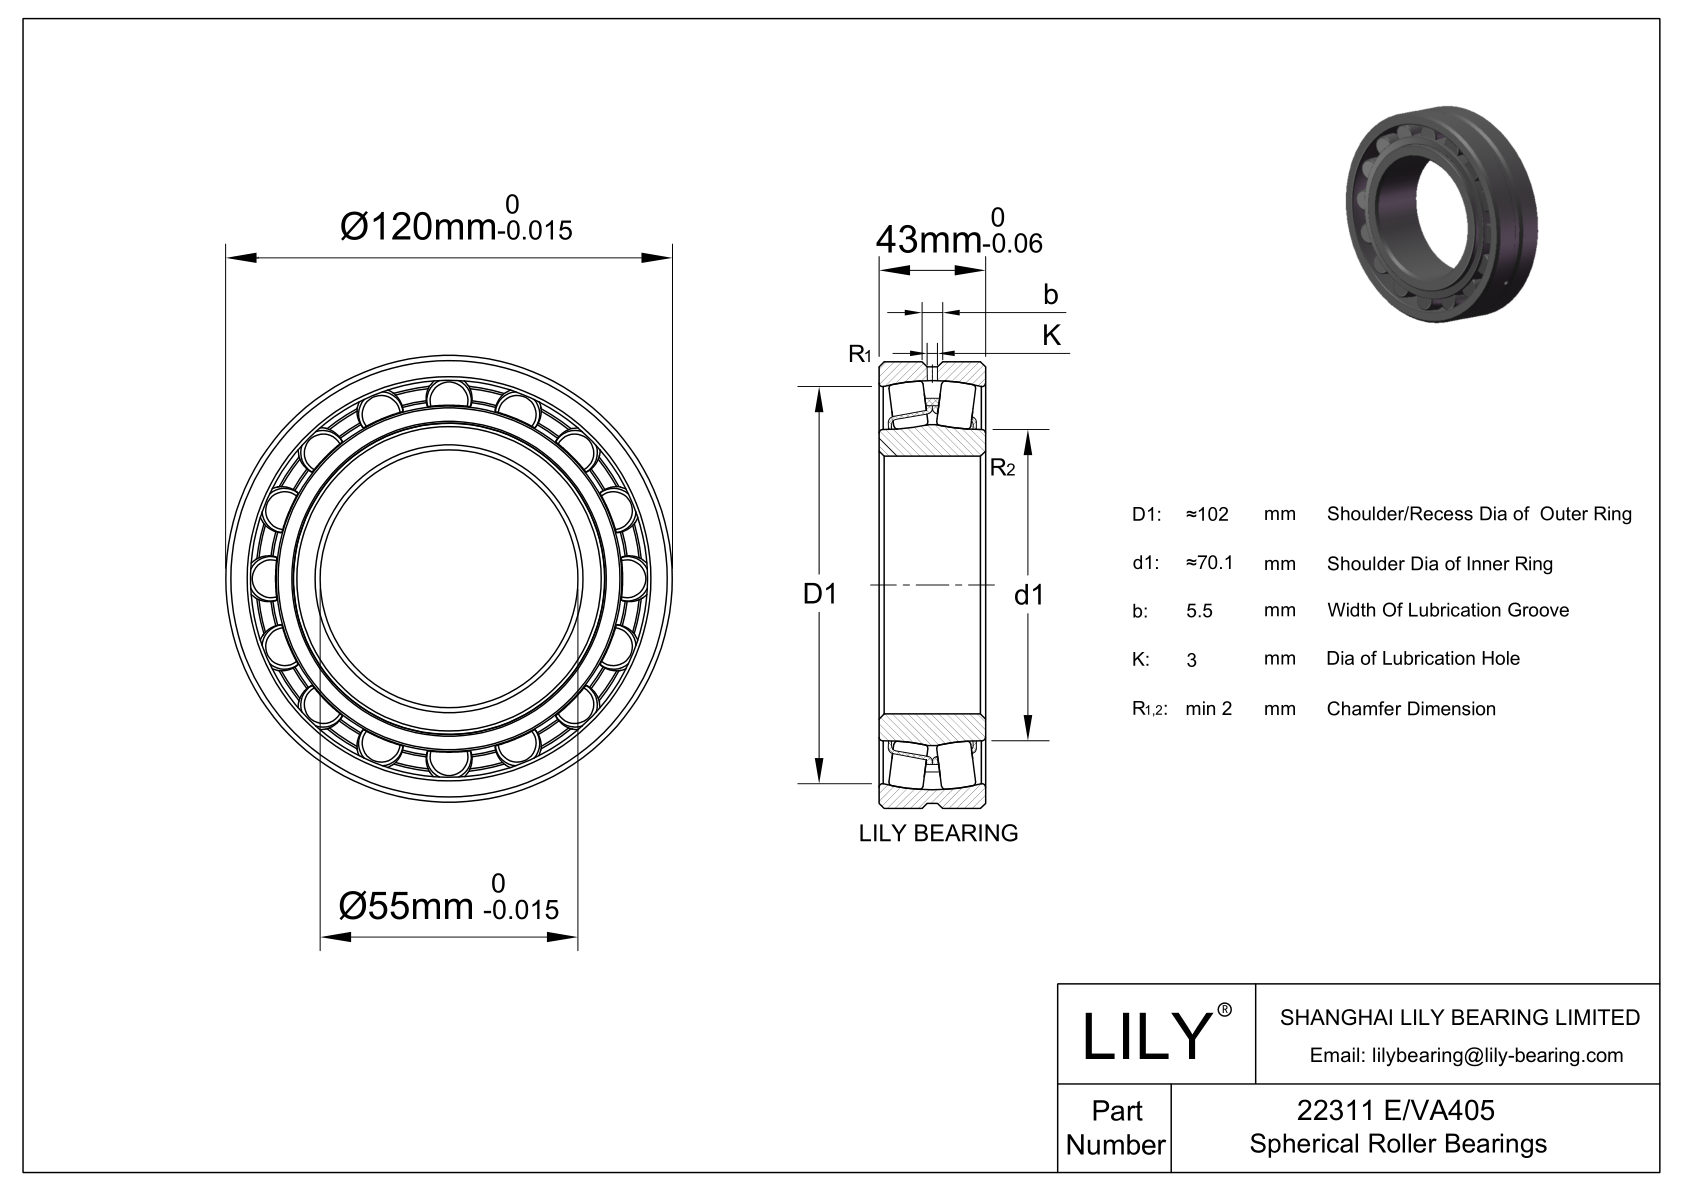 22311 E/VA405 Double Row Spherical Roller Bearing cad drawing